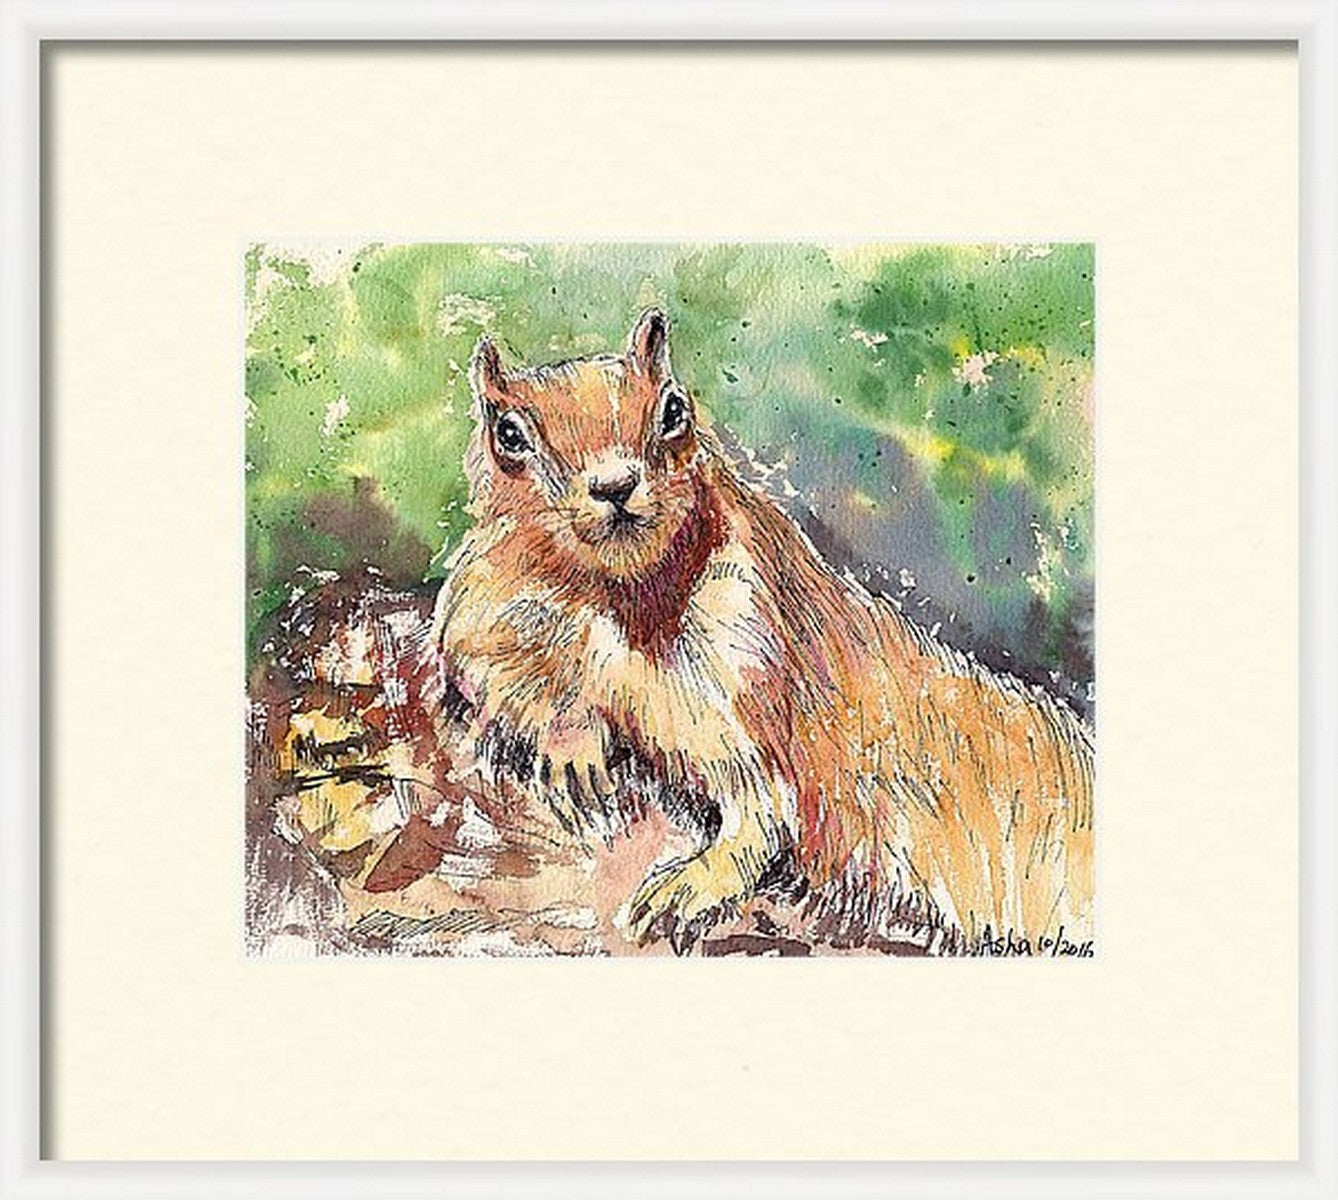 Virtual frame, Red Squirrel Sunbathing- Ink and watercolor wash on paper